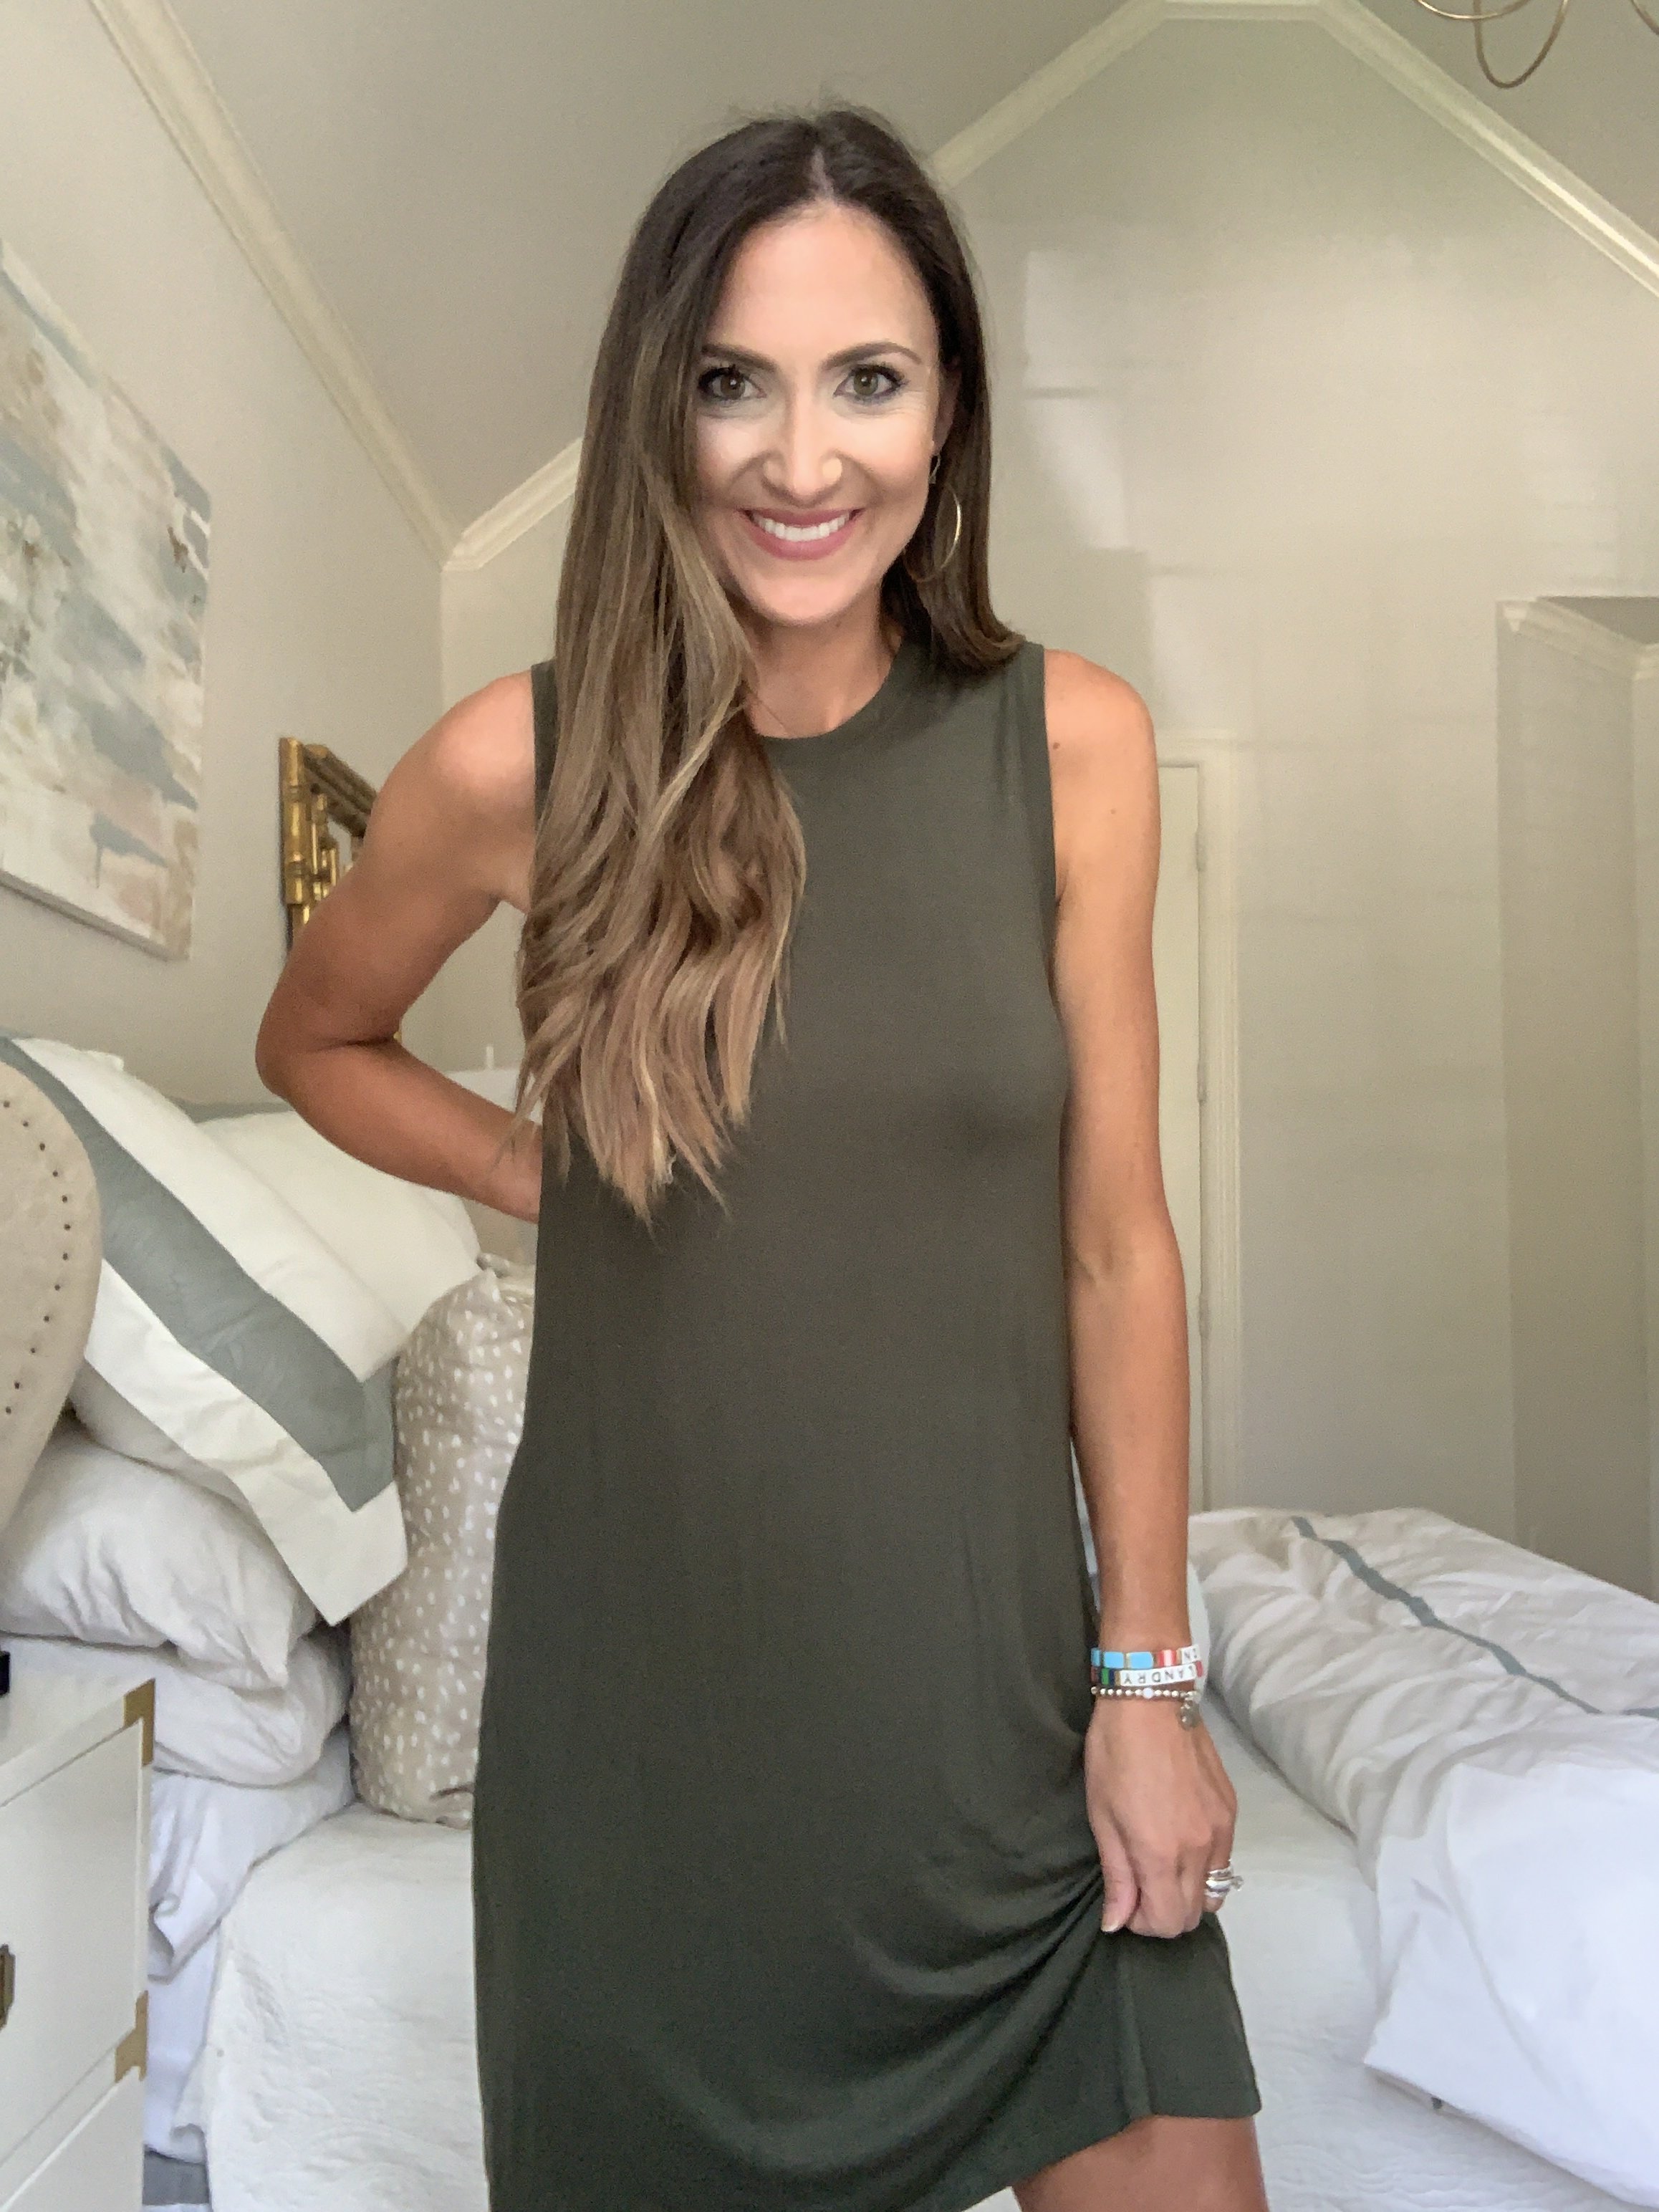 Olive green tank dress from Amazon | Style Your Senses